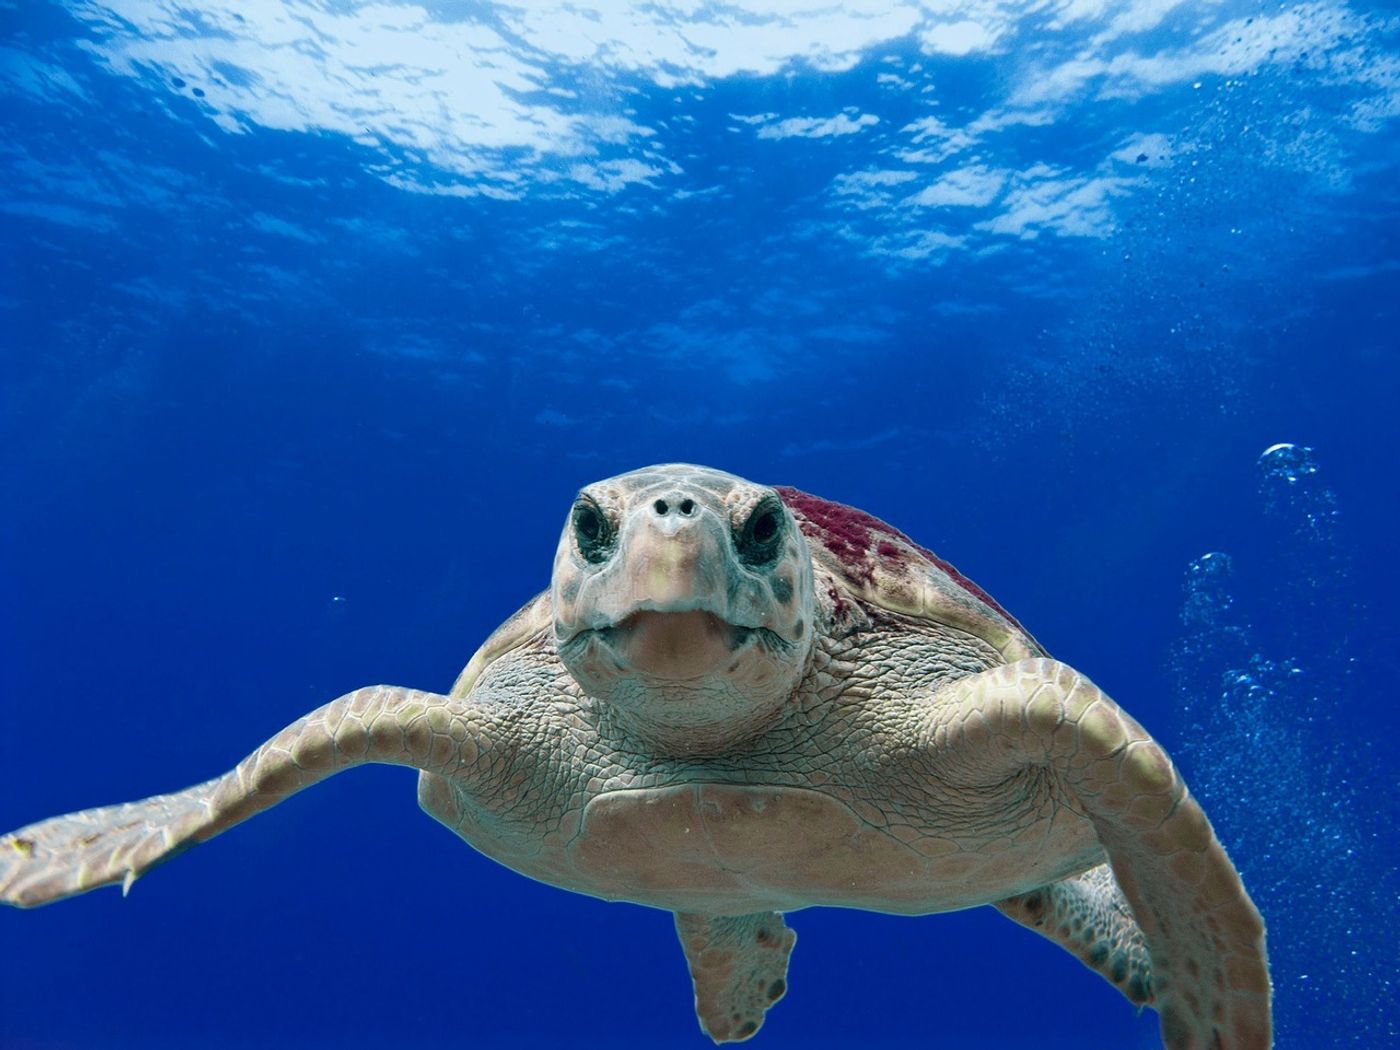 Six of the seven known sea turtle species are on the IUCN's Red List. Conservation efforts are critical to protect them from extinction.